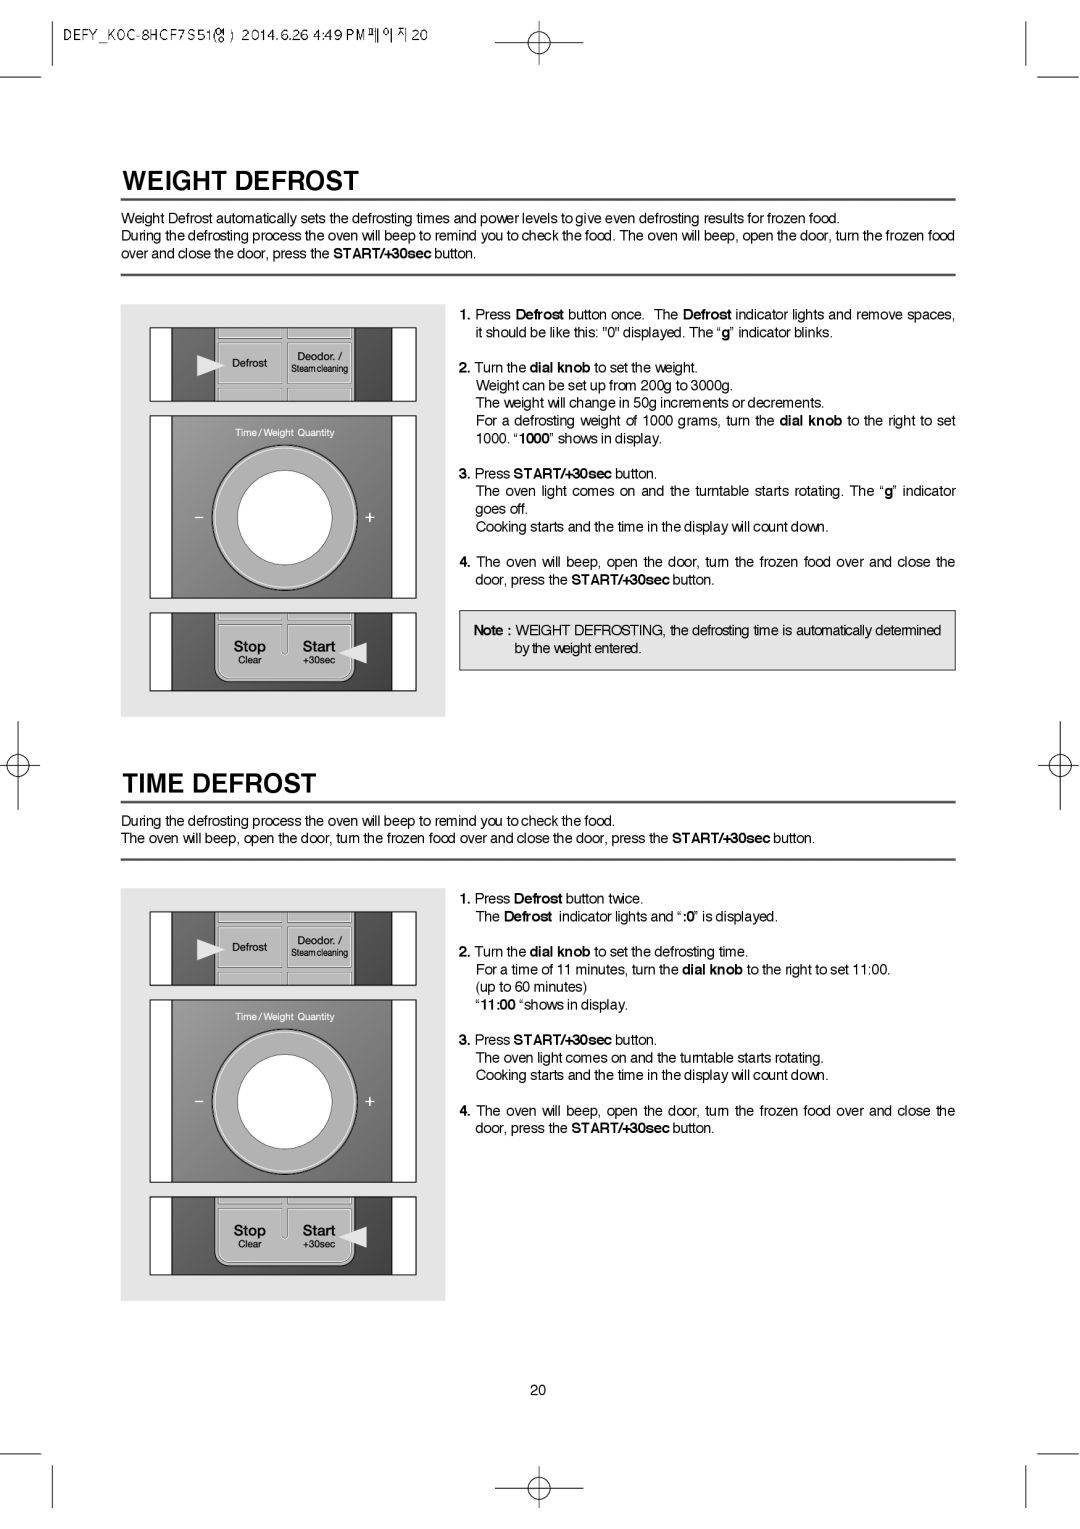 Defy Appliances MWA 2434 MM user manual Weight Defrost, Time Defrost 